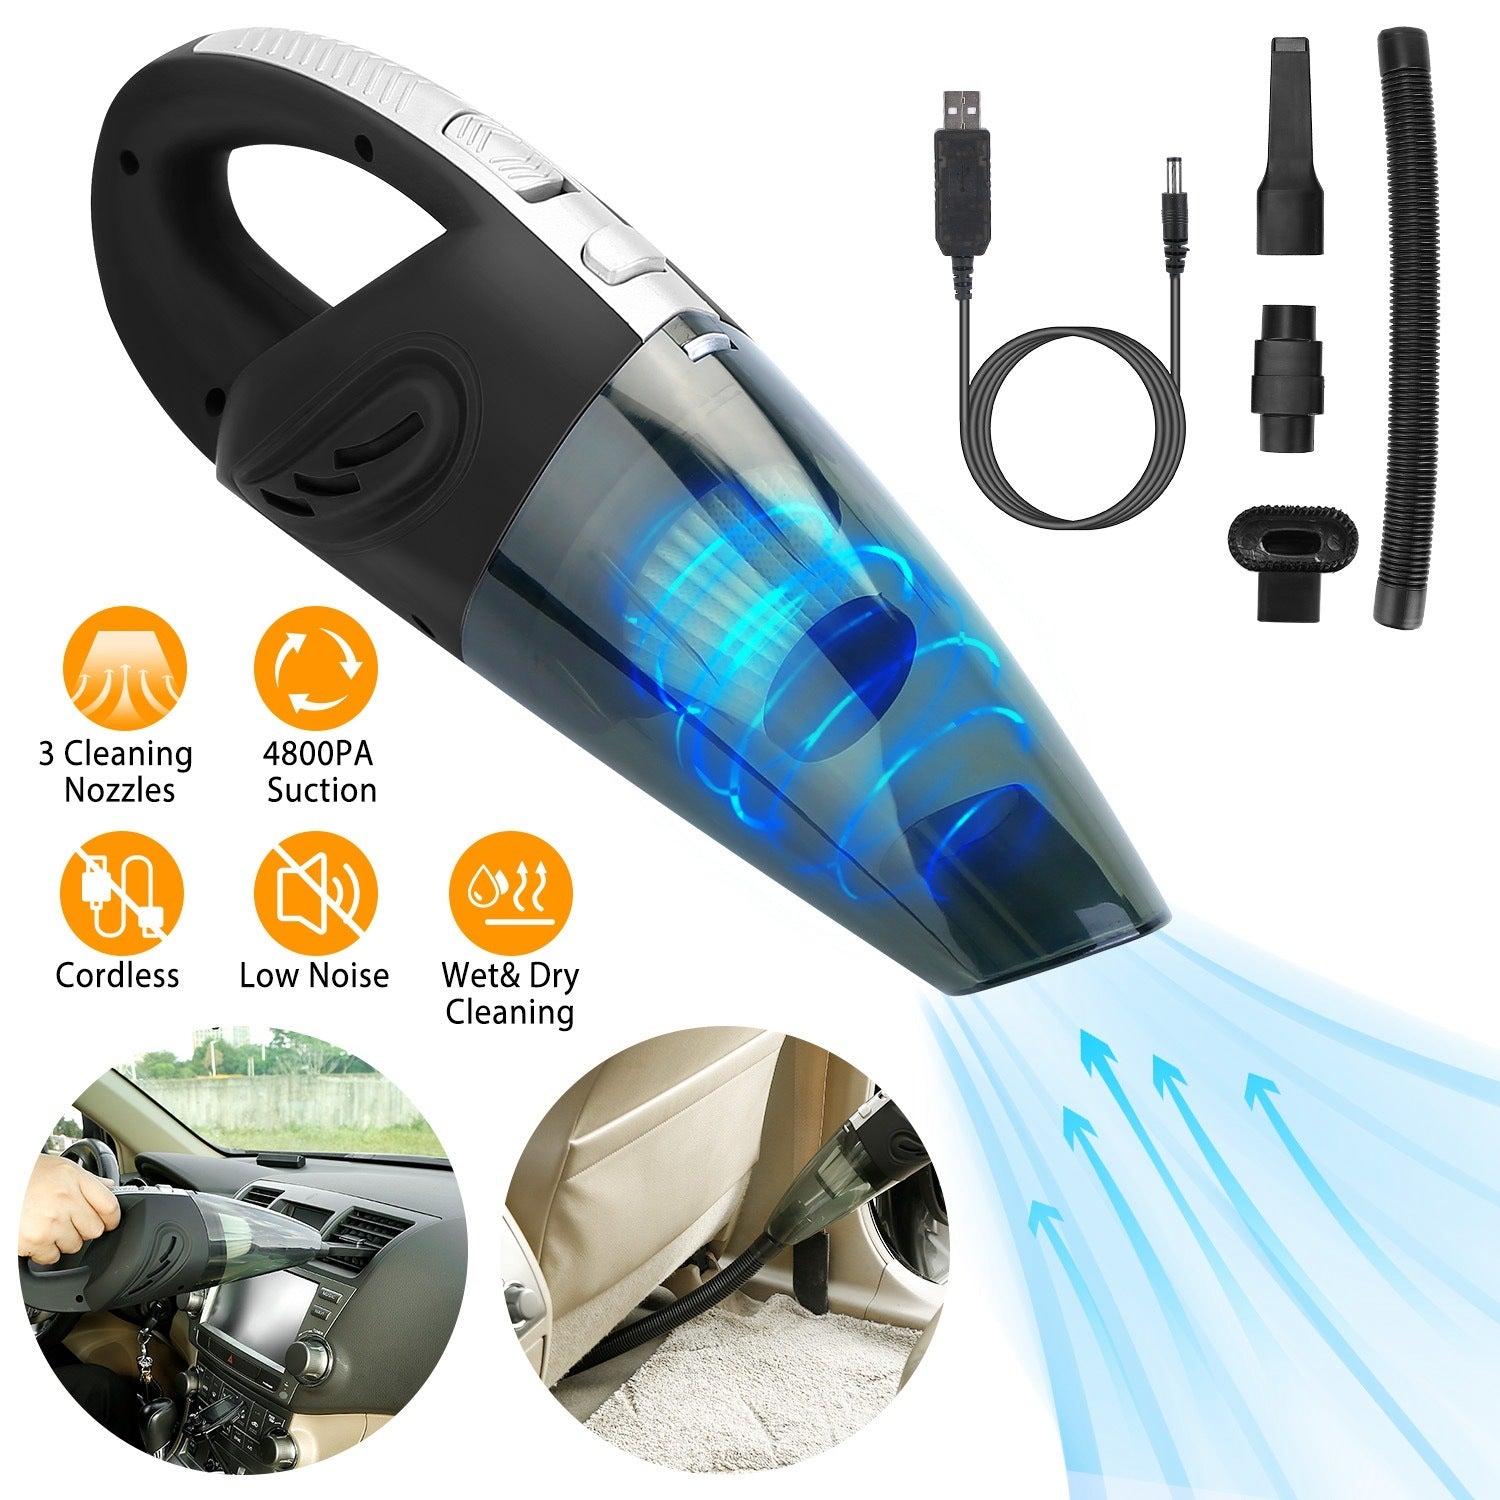 This Car Handheld Vacuum Cleaner Cordless Rechargeable Hand Vacuum Portable Strong Suction Vacuum combines a powerful motor and cyclonic suction for optimal cleaning, while offering the added benefits of a HEPA filter and a distinctive blue light.